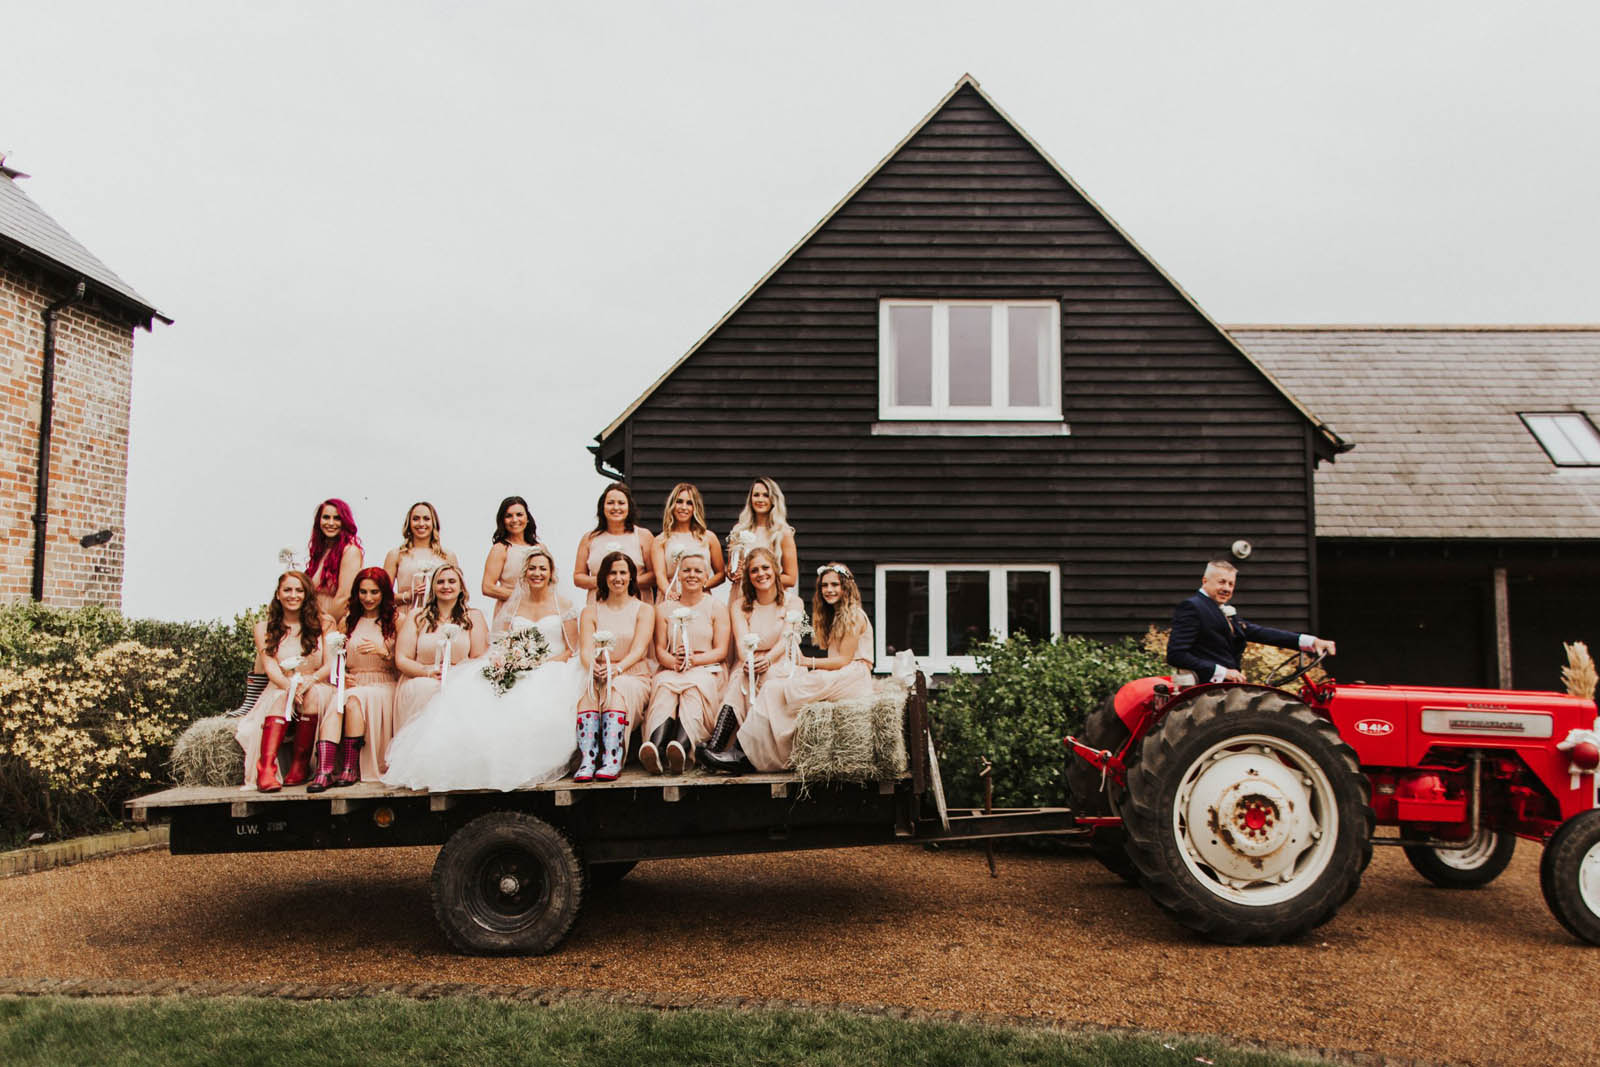 Bridal party on a tractor trailer - Kent wedding venue